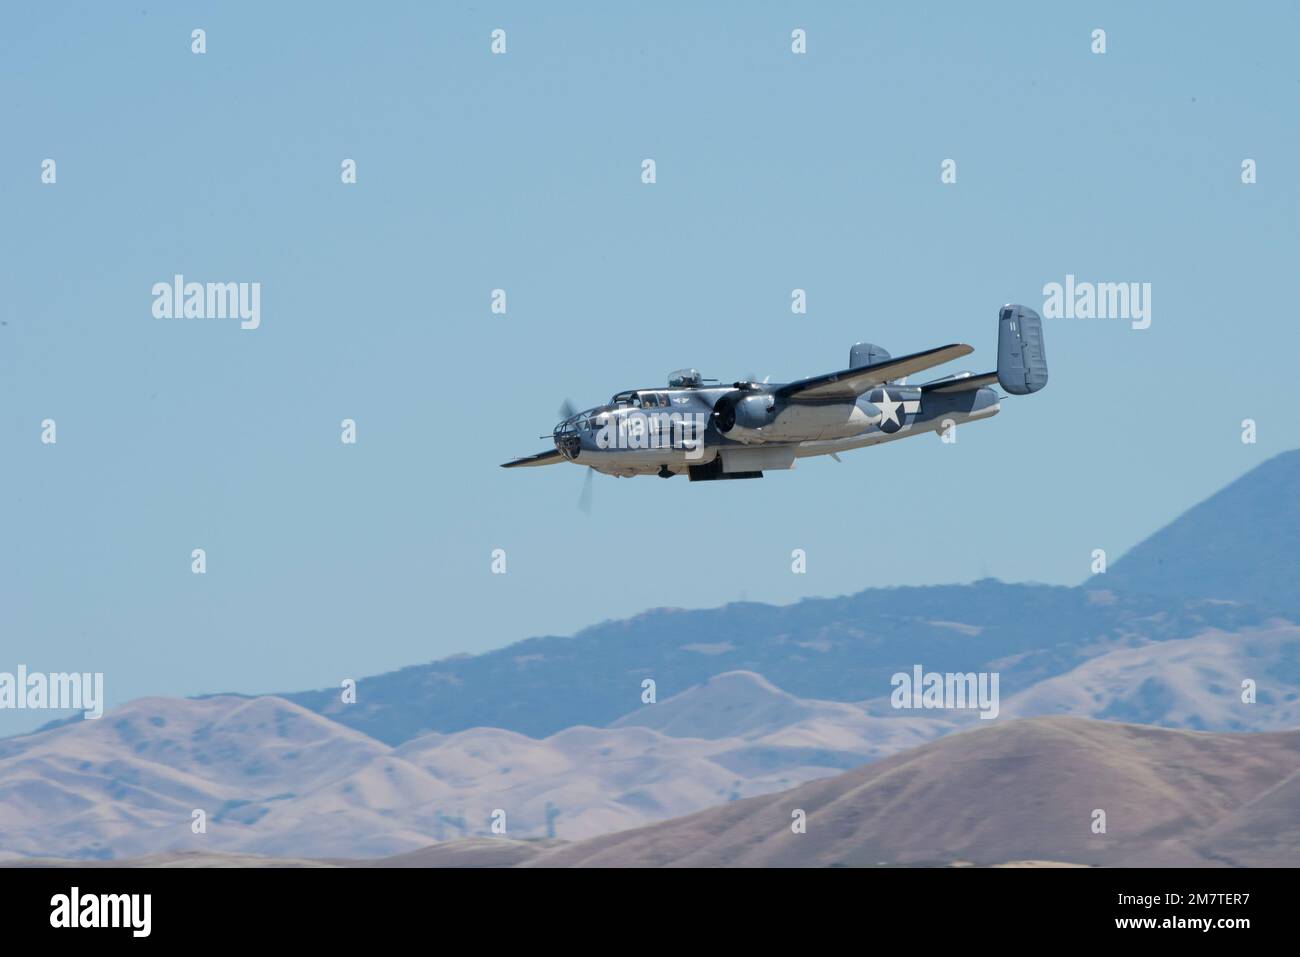 A Mitchell B-25 bomber performs a fly-by during the air show rehearsal at Travis Air Force Base, California, May 13, 2022. The air show rehearsal provided an opportunity for Department of Defense employees and their families to see the air show and full display of the capabilities at Travis AFB. Stock Photo